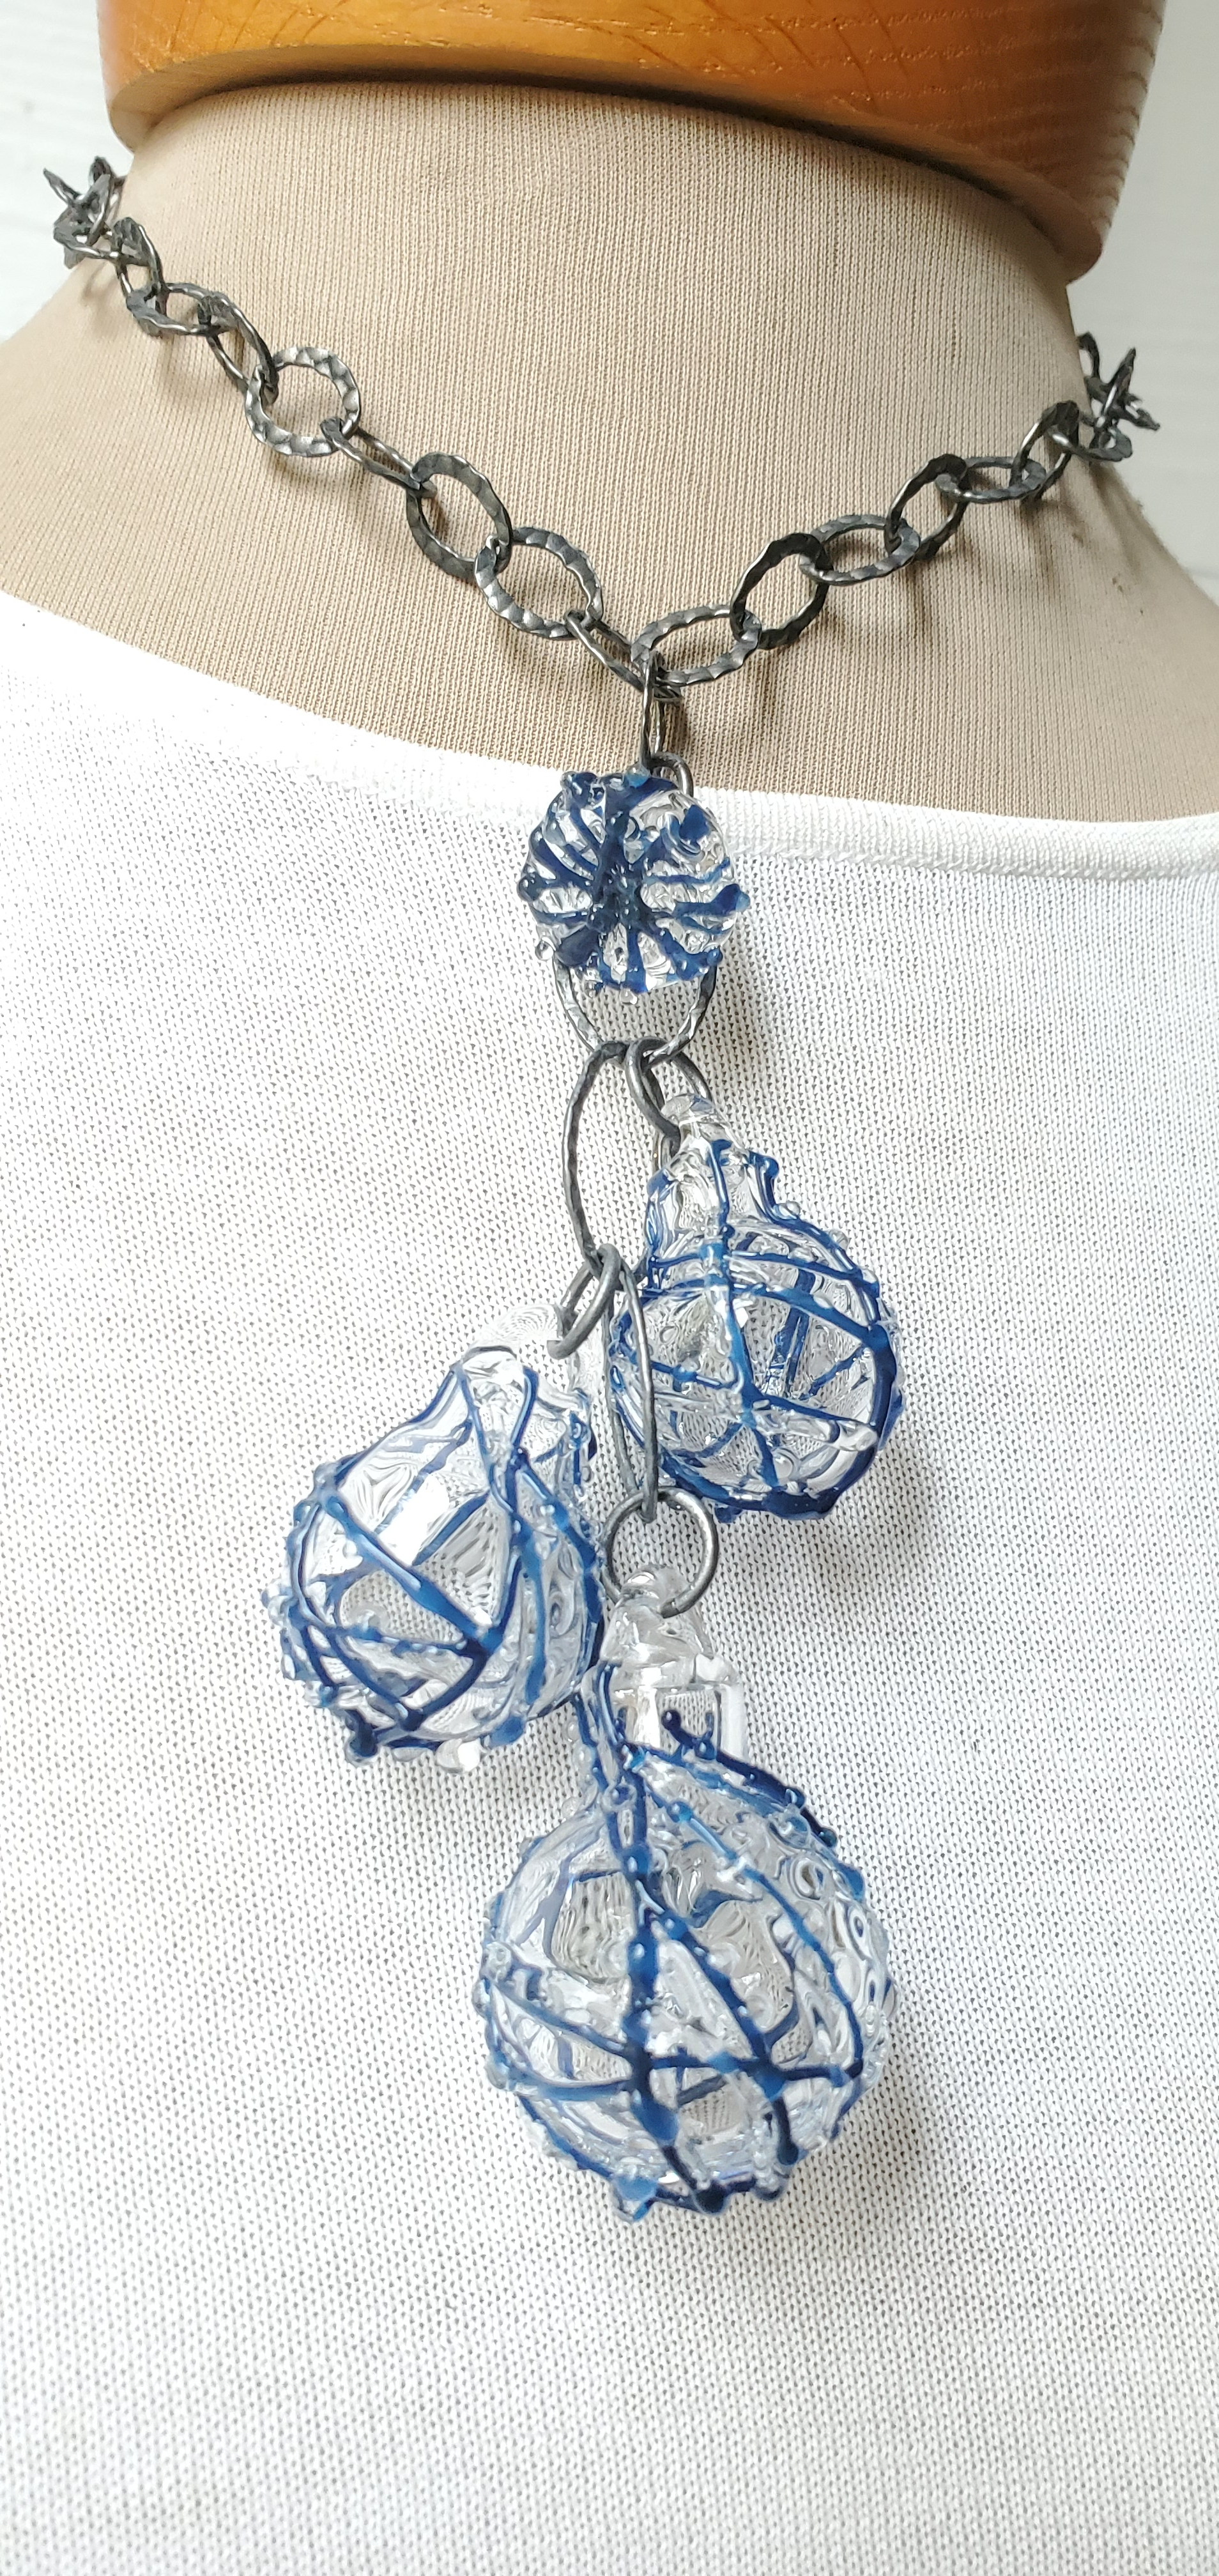 blue and clear "stained glass pattern" cascade necklace